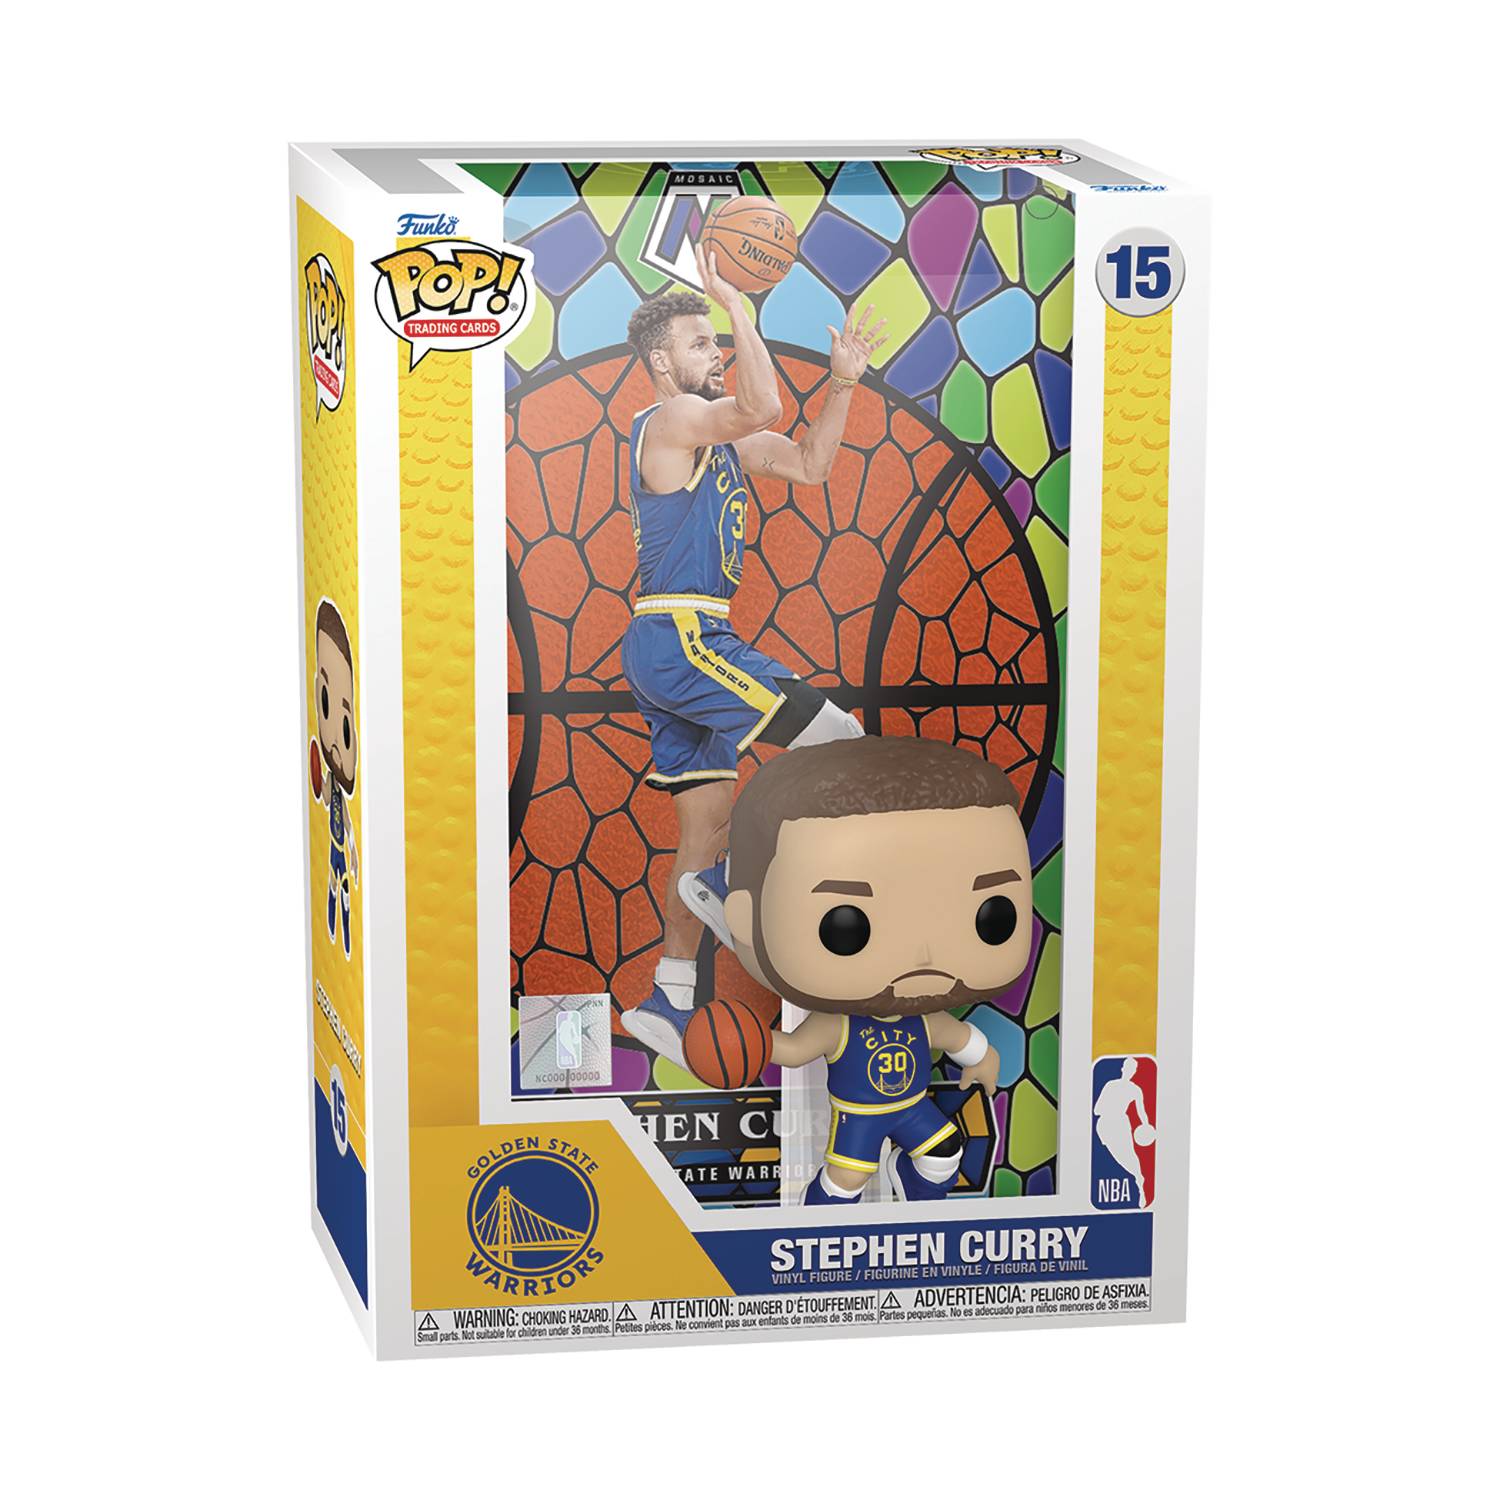 POP TRADING CARDS MOSAIC STEPHEN CURRY